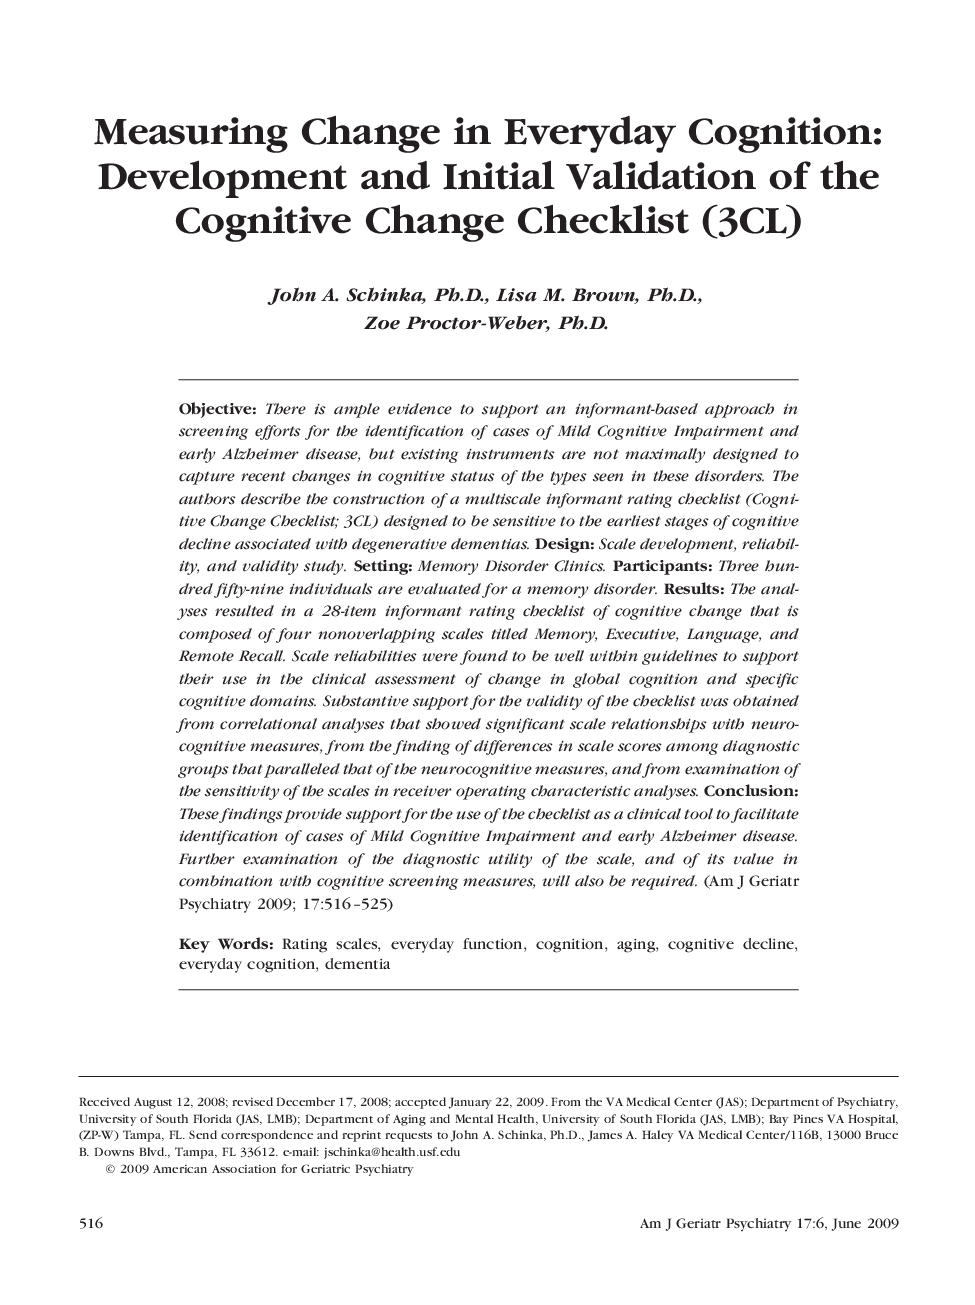 Measuring Change in Everyday Cognition: Development and Initial Validation of the Cognitive Change Checklist (3CL)